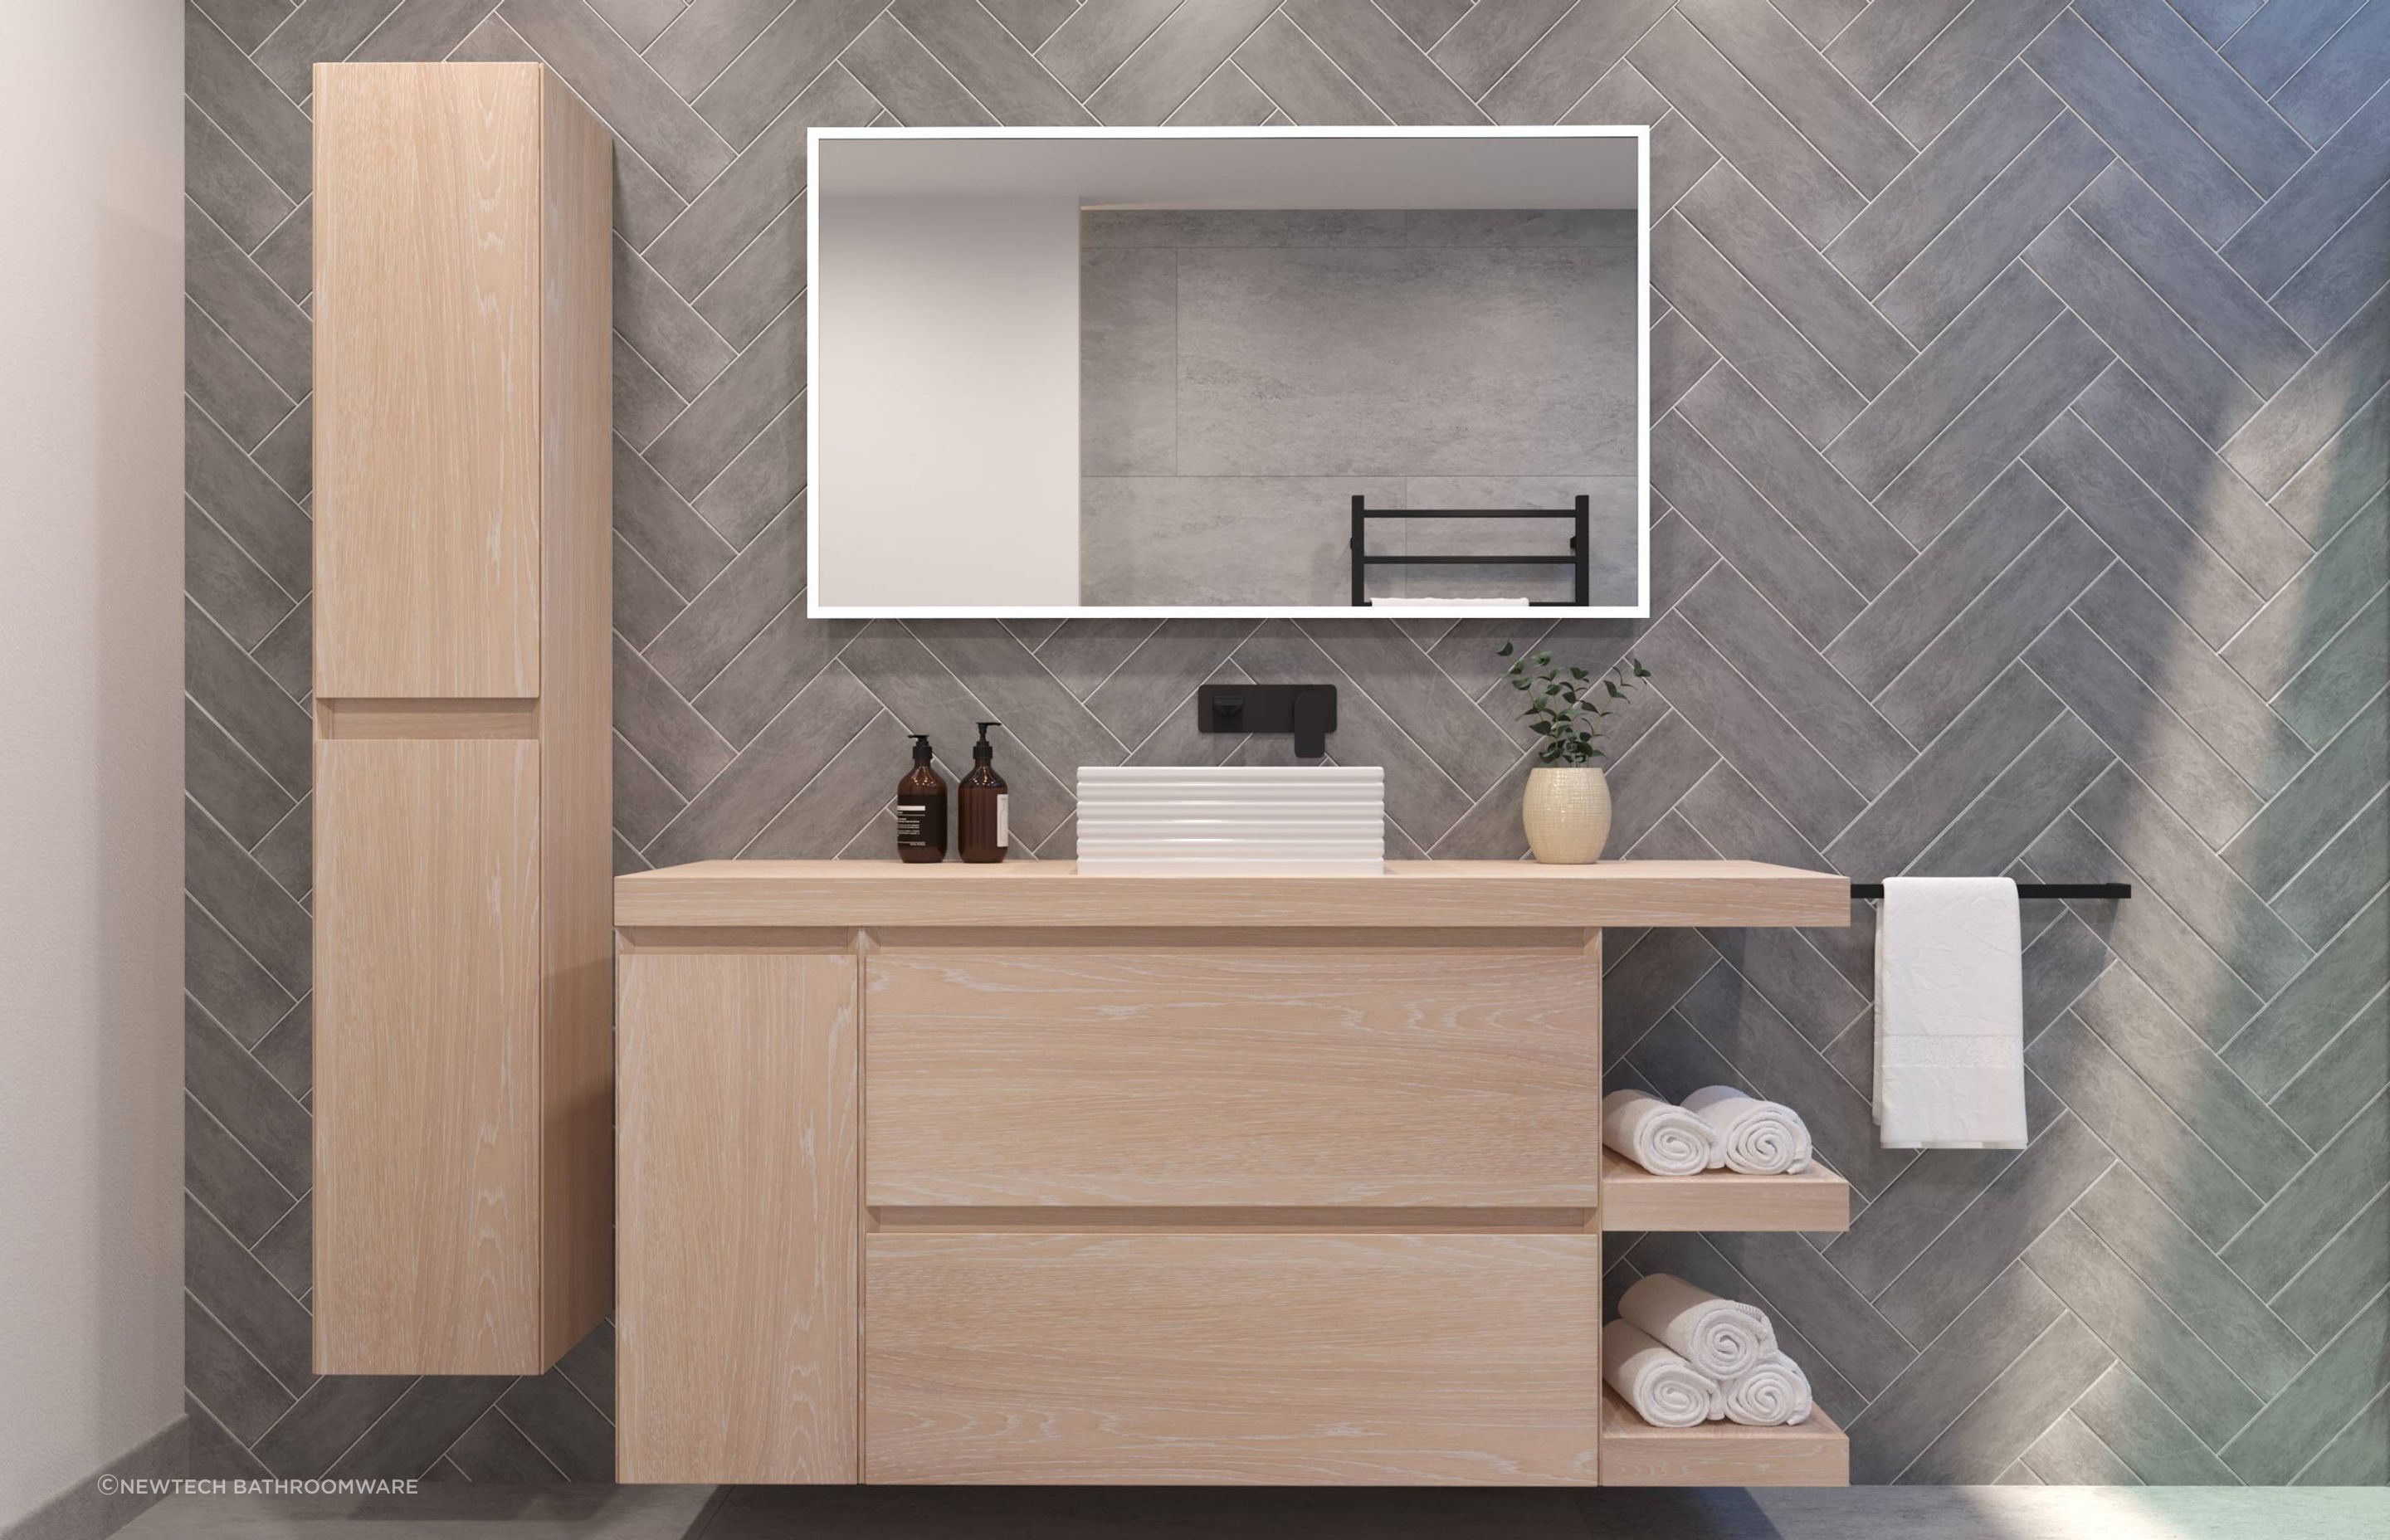 The Milazzo Modular Bathroom System vanities give you great customisation like open shelving and closed storage.